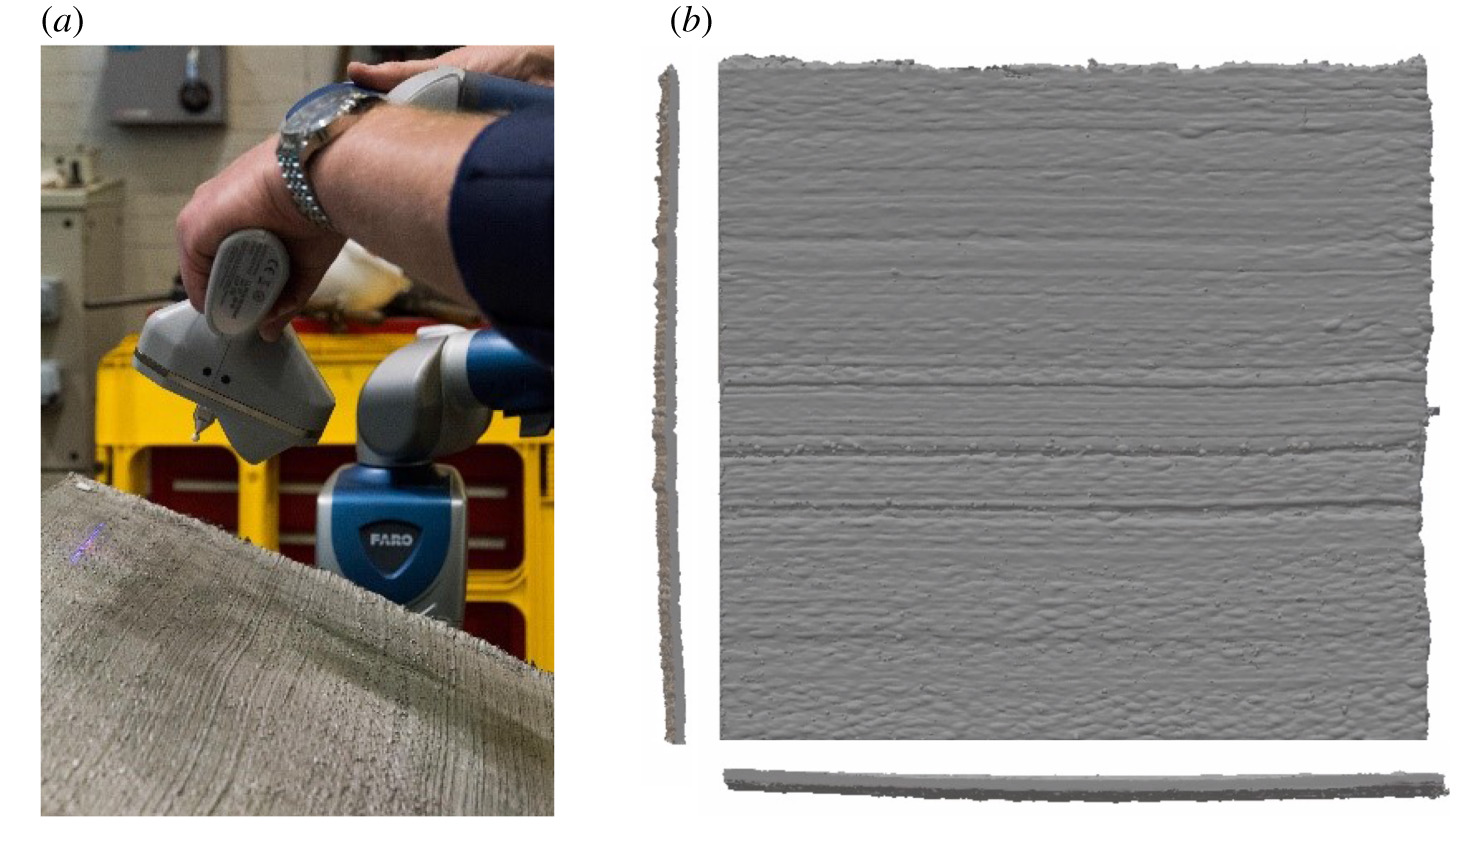 Laser scan of a three-dimensional-printed steel sheet. (a) Photograph of the hand-held scanning equipment. (b) Orthographic projection of (a portion of) the scanned sheet, denoted a panel. The notional thickness of the panel is 3.5?mm. (Observe a slight curvature in the notionally flat panel introduced by the residual stress.) (Online version in color.)